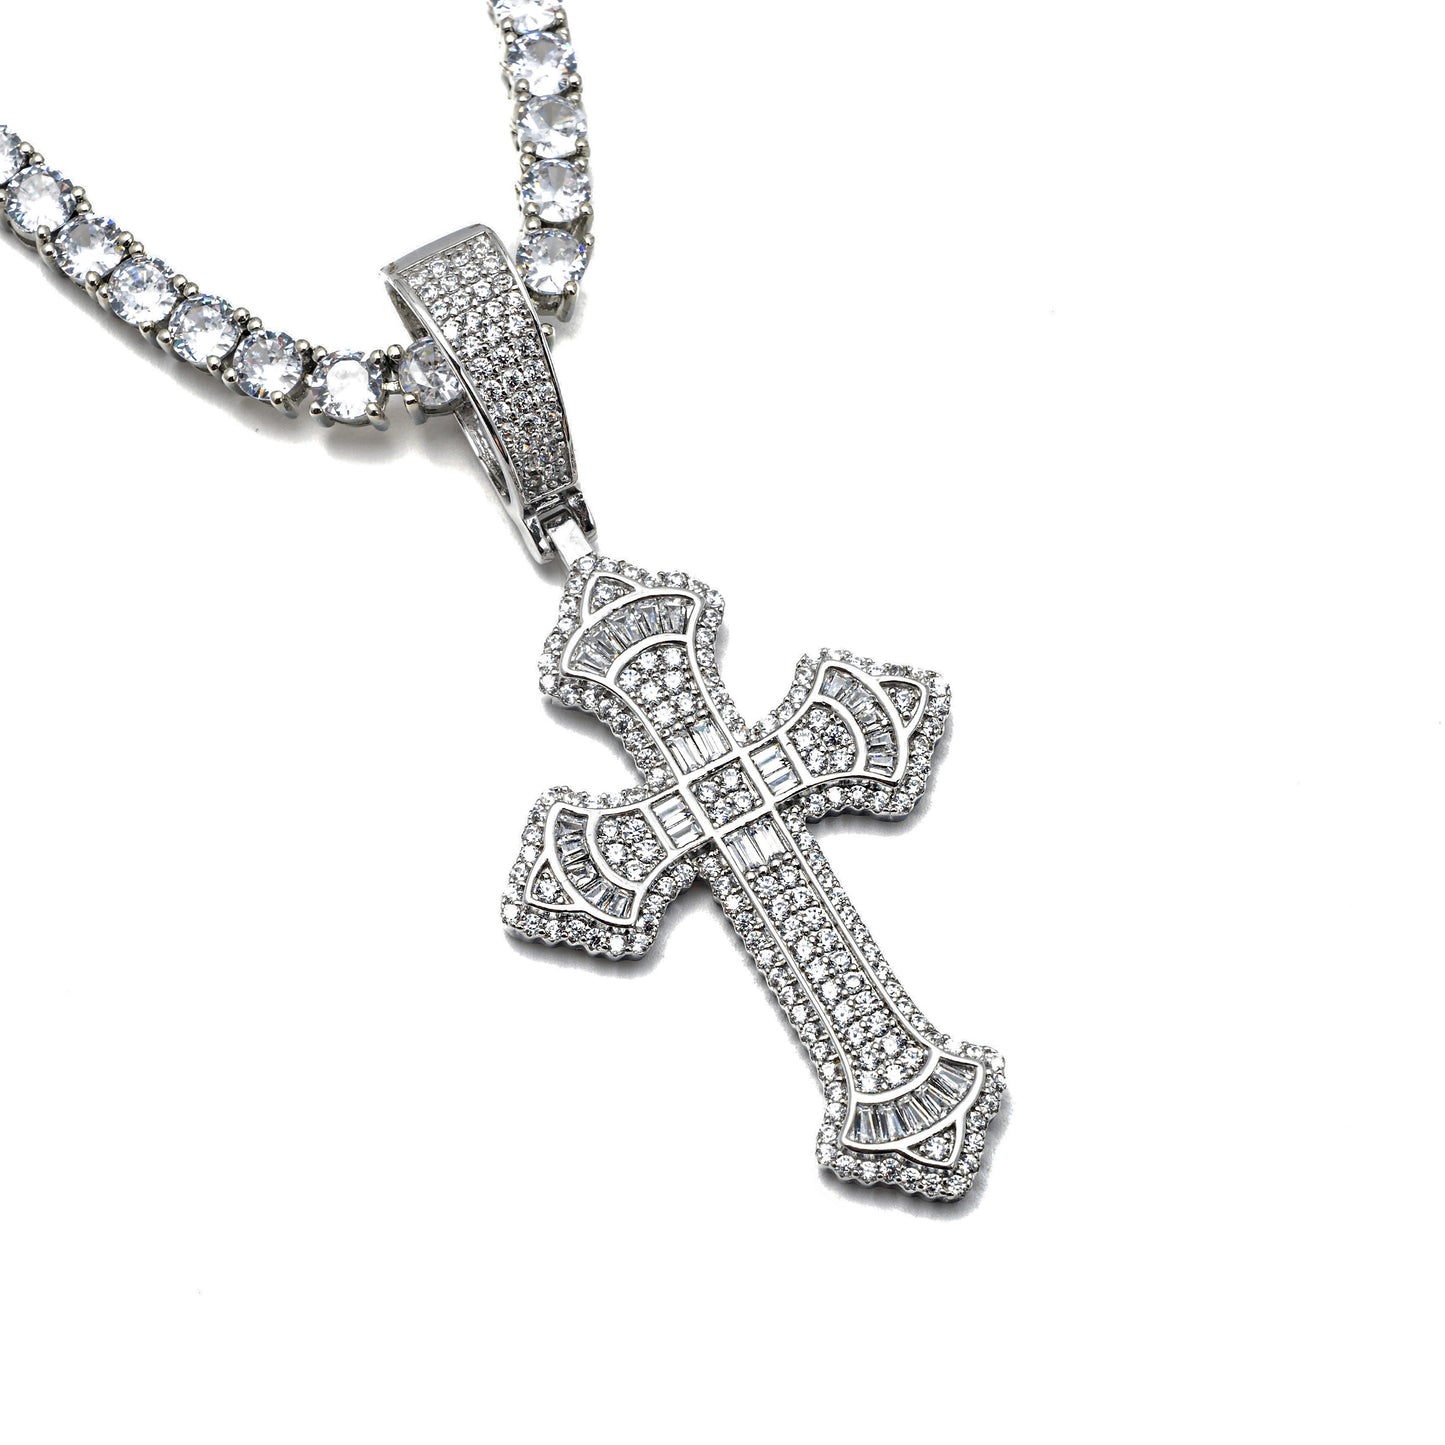 ICY GOTHIC CROSS NECKLACE II